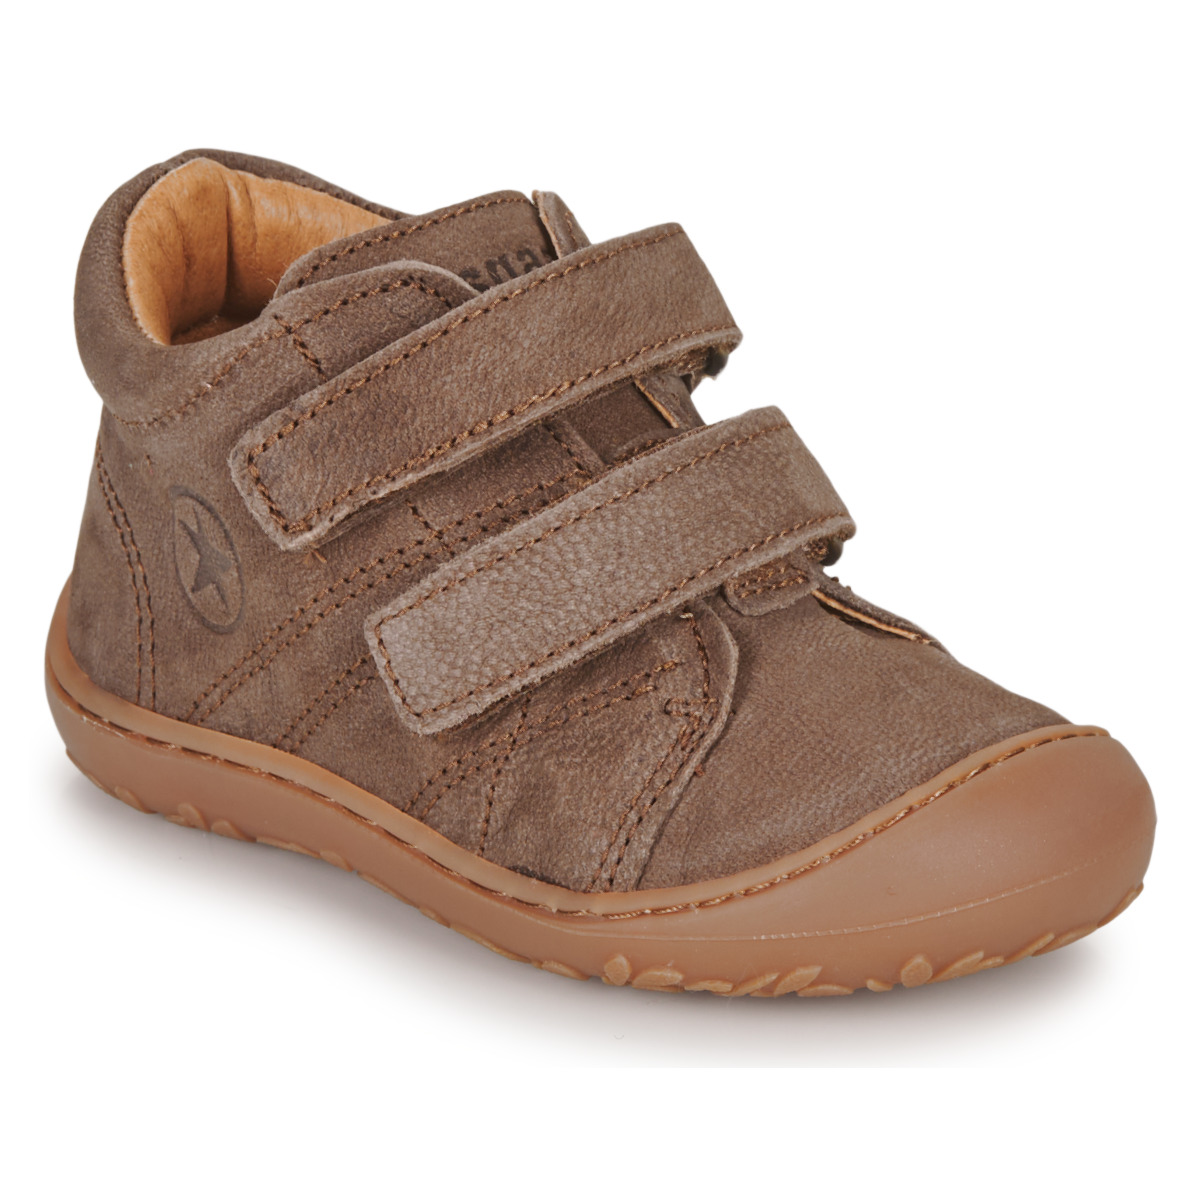 Shoes Children High top trainers Bisgaard HALE V Brown